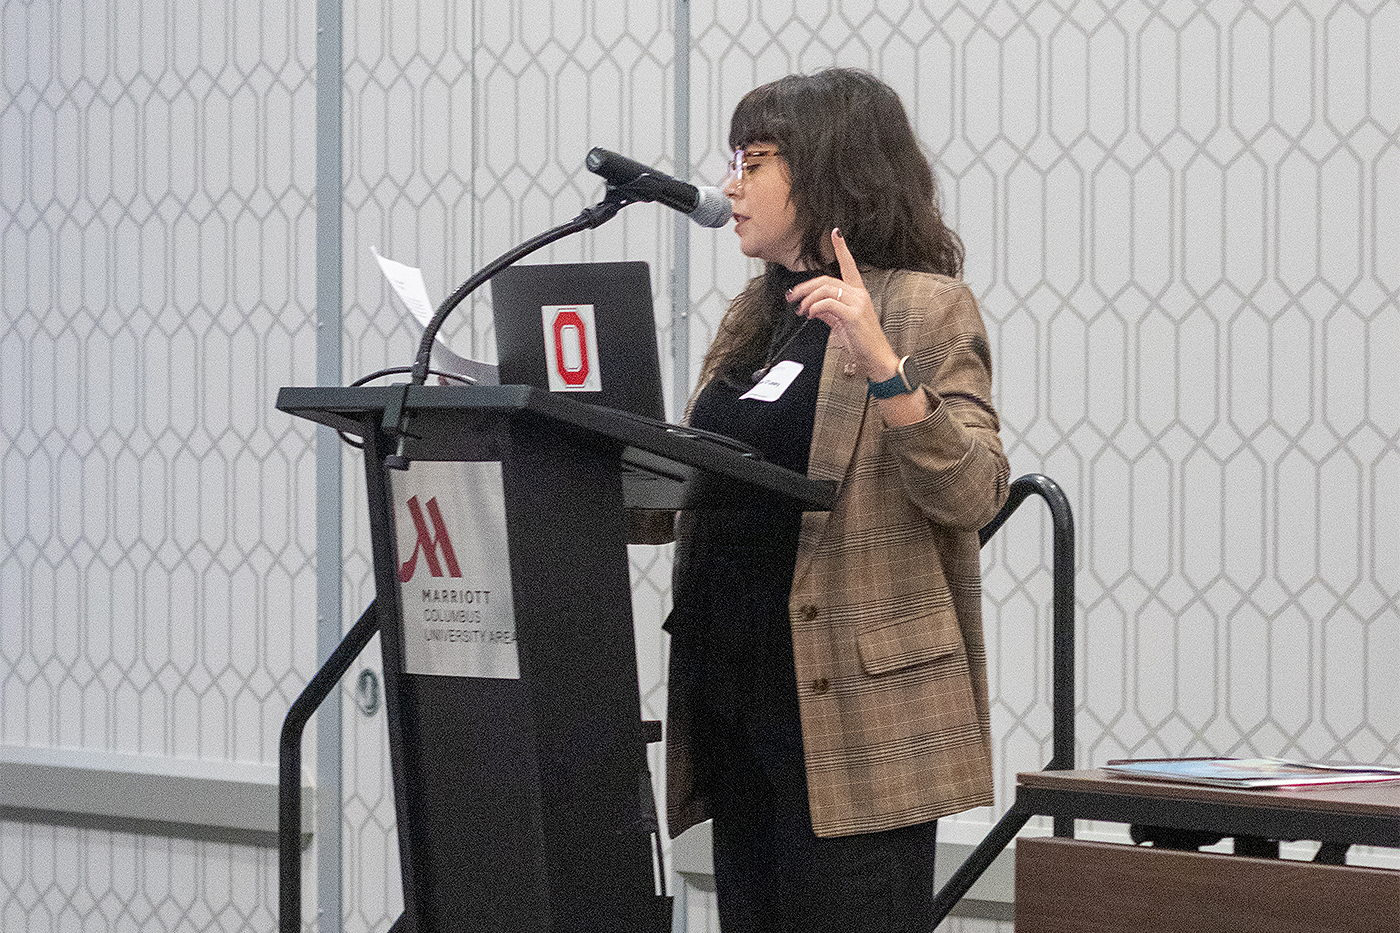 Jamie O'Leary, the Crane Center's associate director of policy and external affairs, stands behind a podium and speaks into a microphone attached to the podium during the 2023 Symposium on Children.